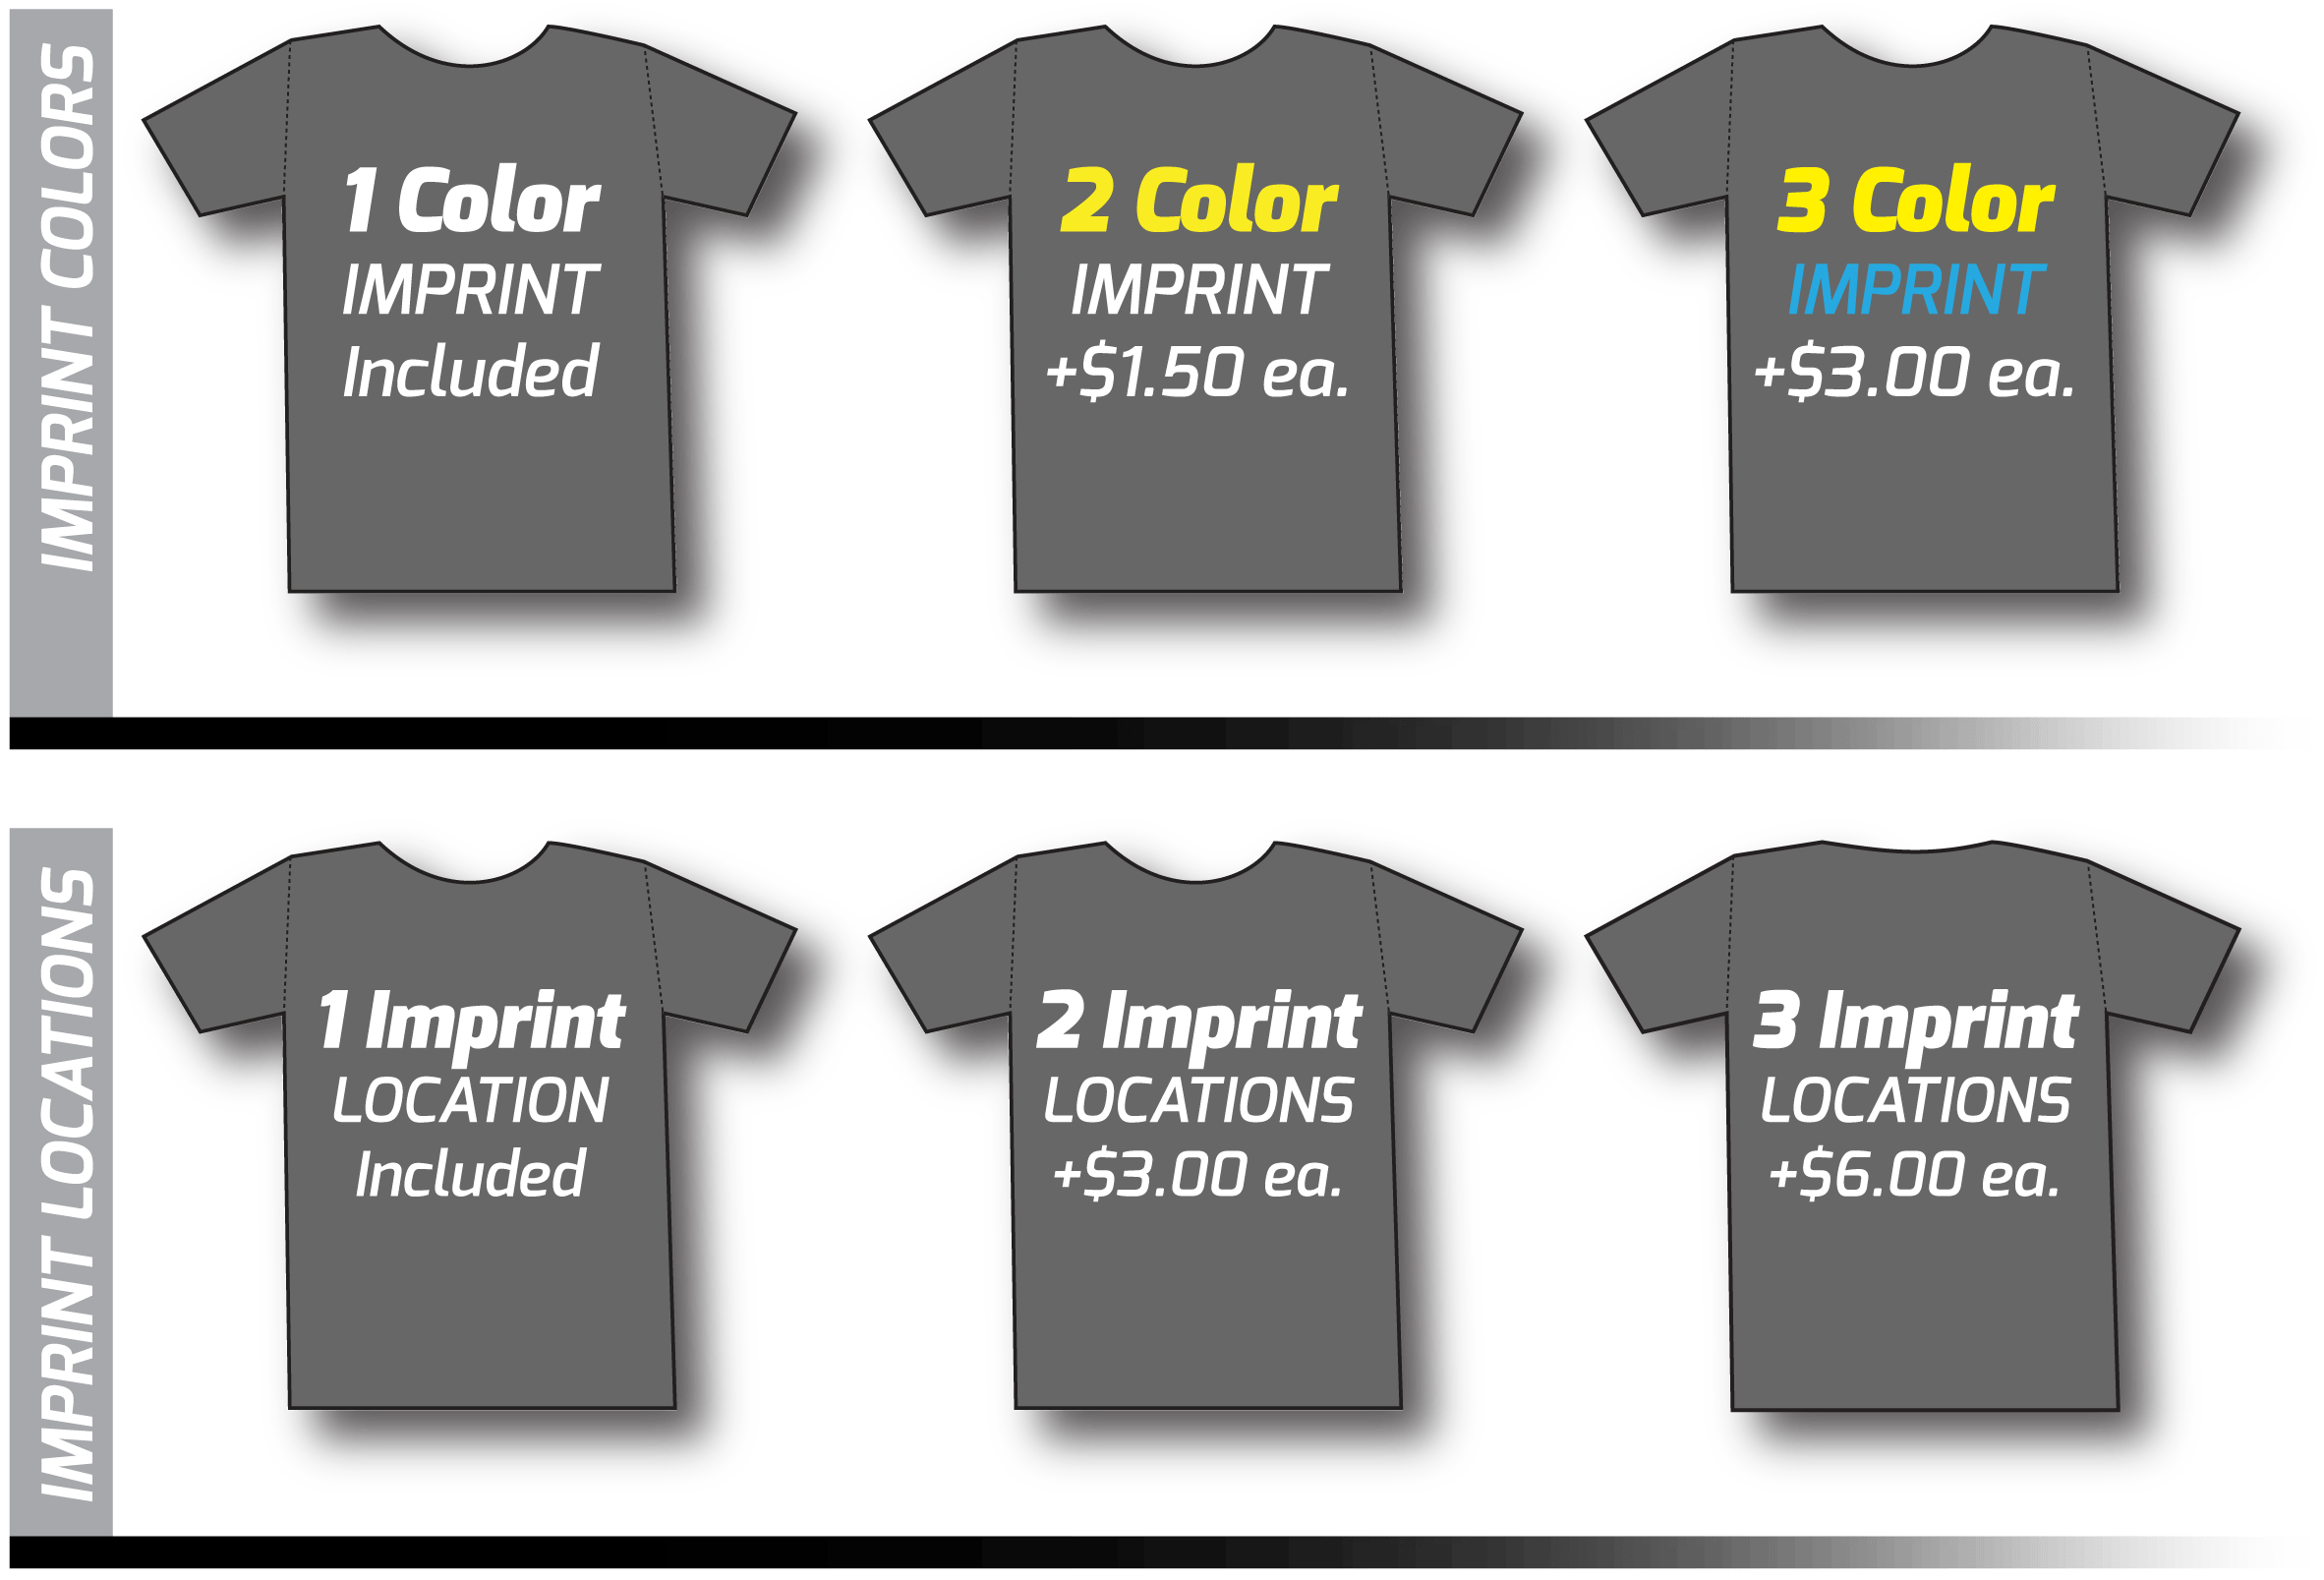 Additional imprint color cost